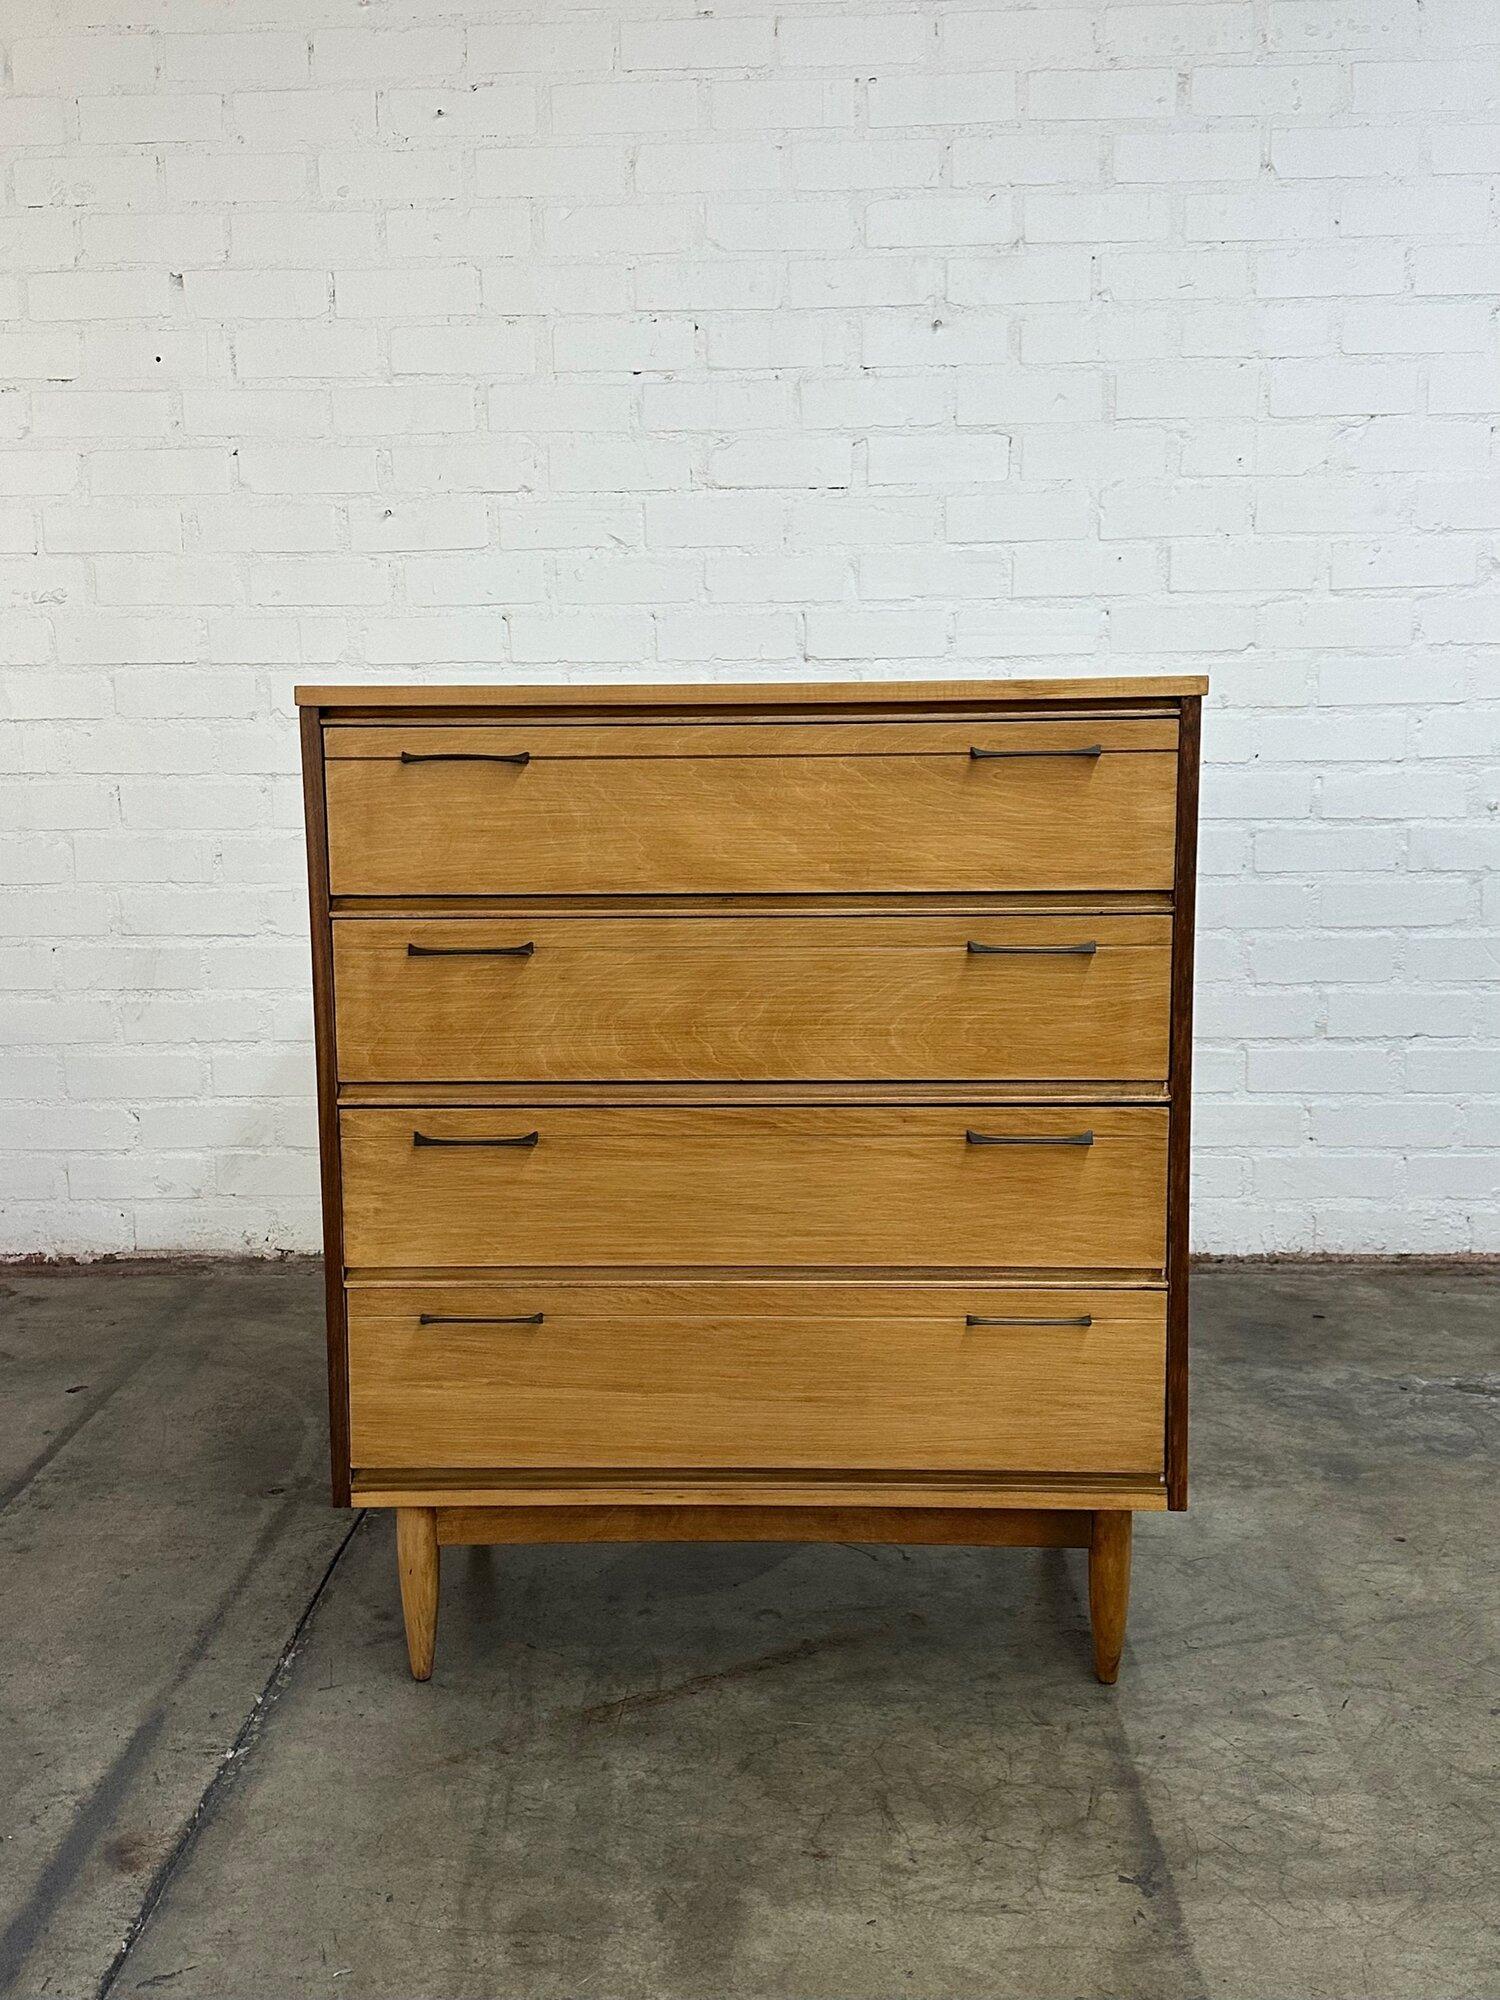 W36 D18 H43

1960’s fully refinished Highboy dresser with original hardware. Item features 4 drawers and is structurally sound and sturdy.